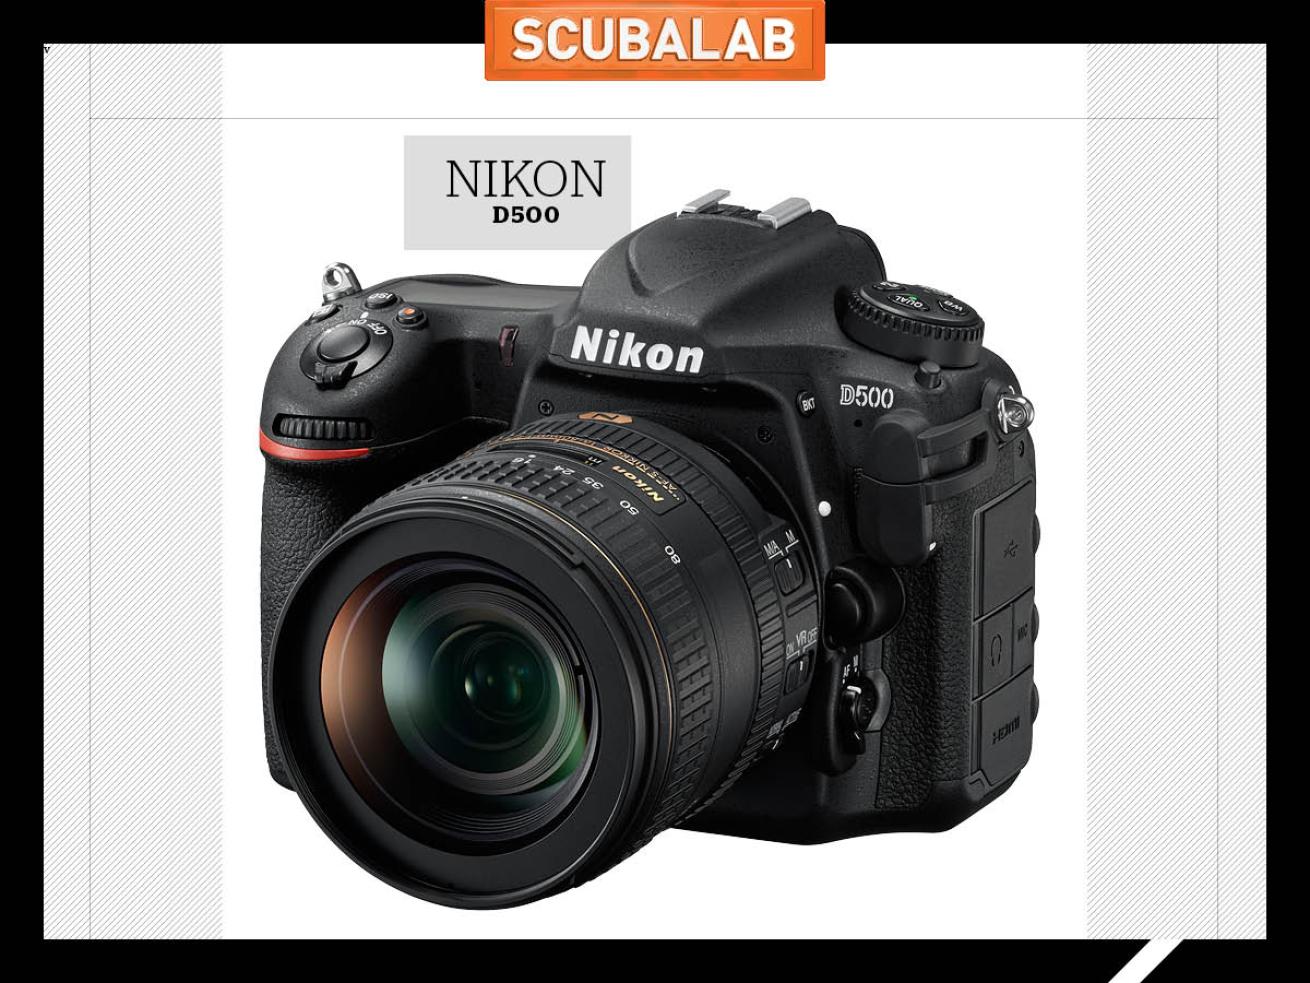 Nikon D500 camera for underwater photography